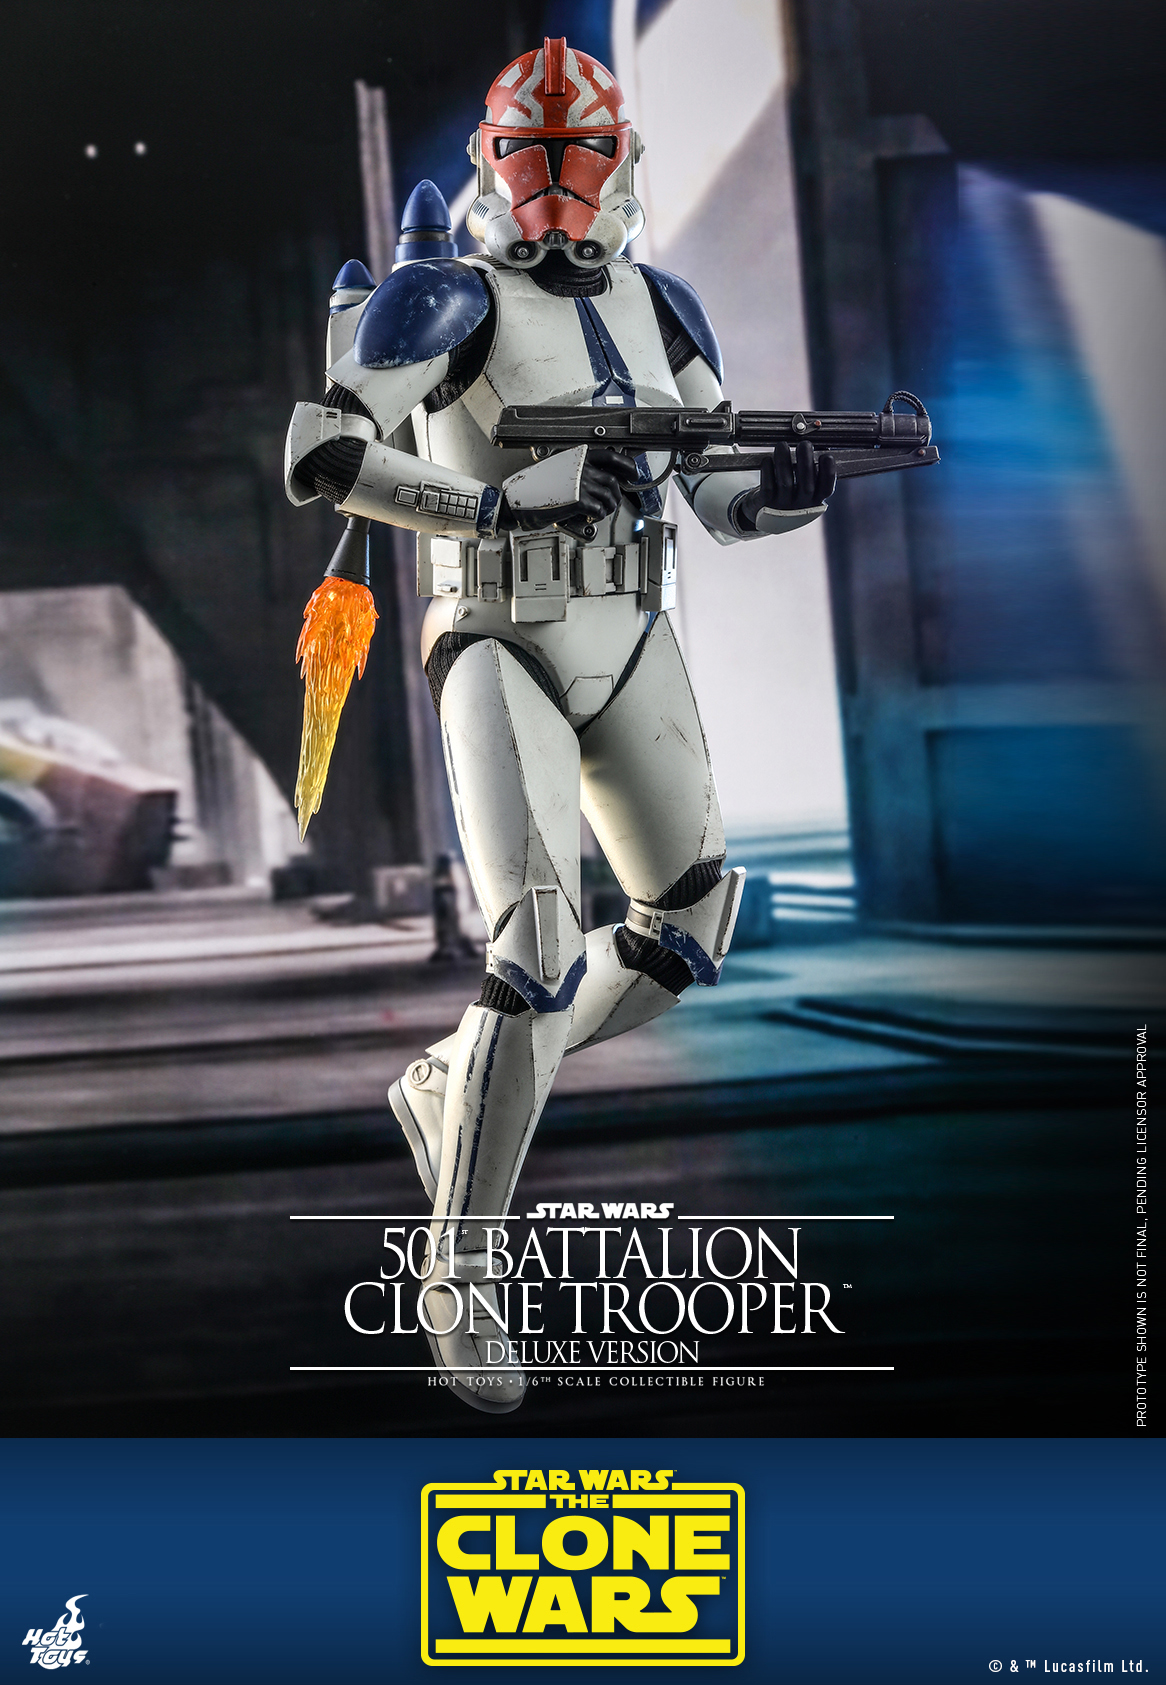 HotToys 1/6 Figure TMS023 501st Battalion Clone Trooper Deluxe Version(Star Wars: The Clone Wars)